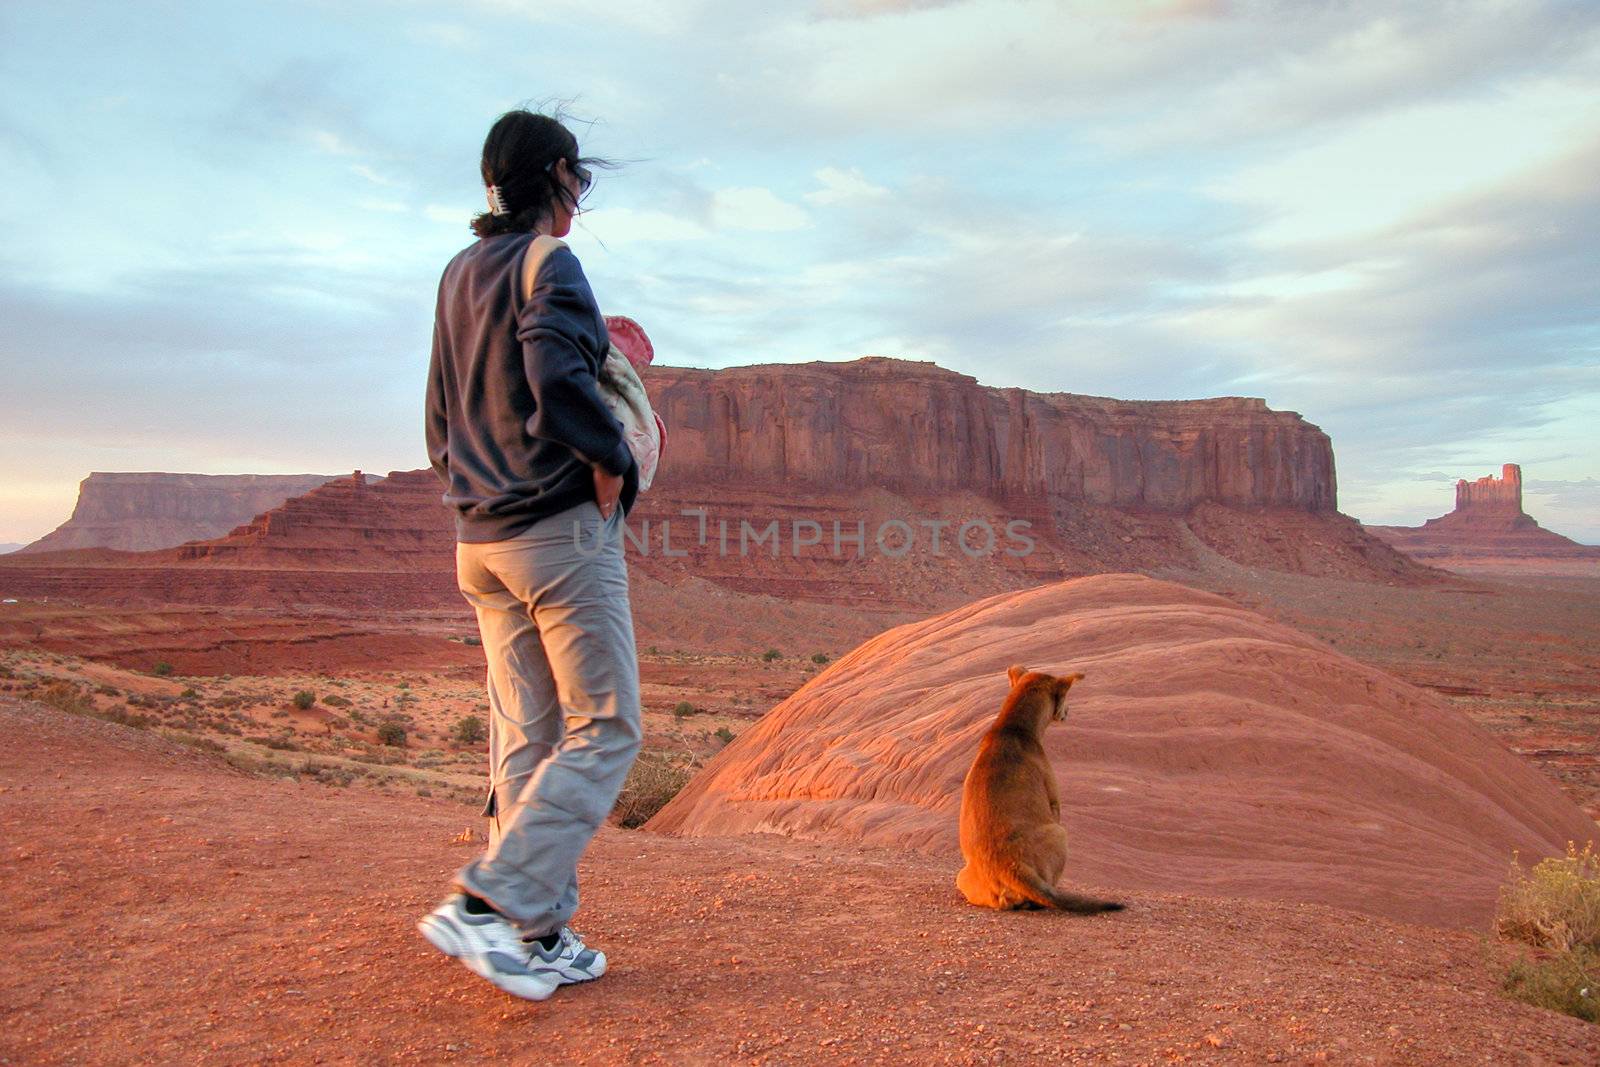 Staring at the Monument Valley, U.S.A., August 2008 by jovannig